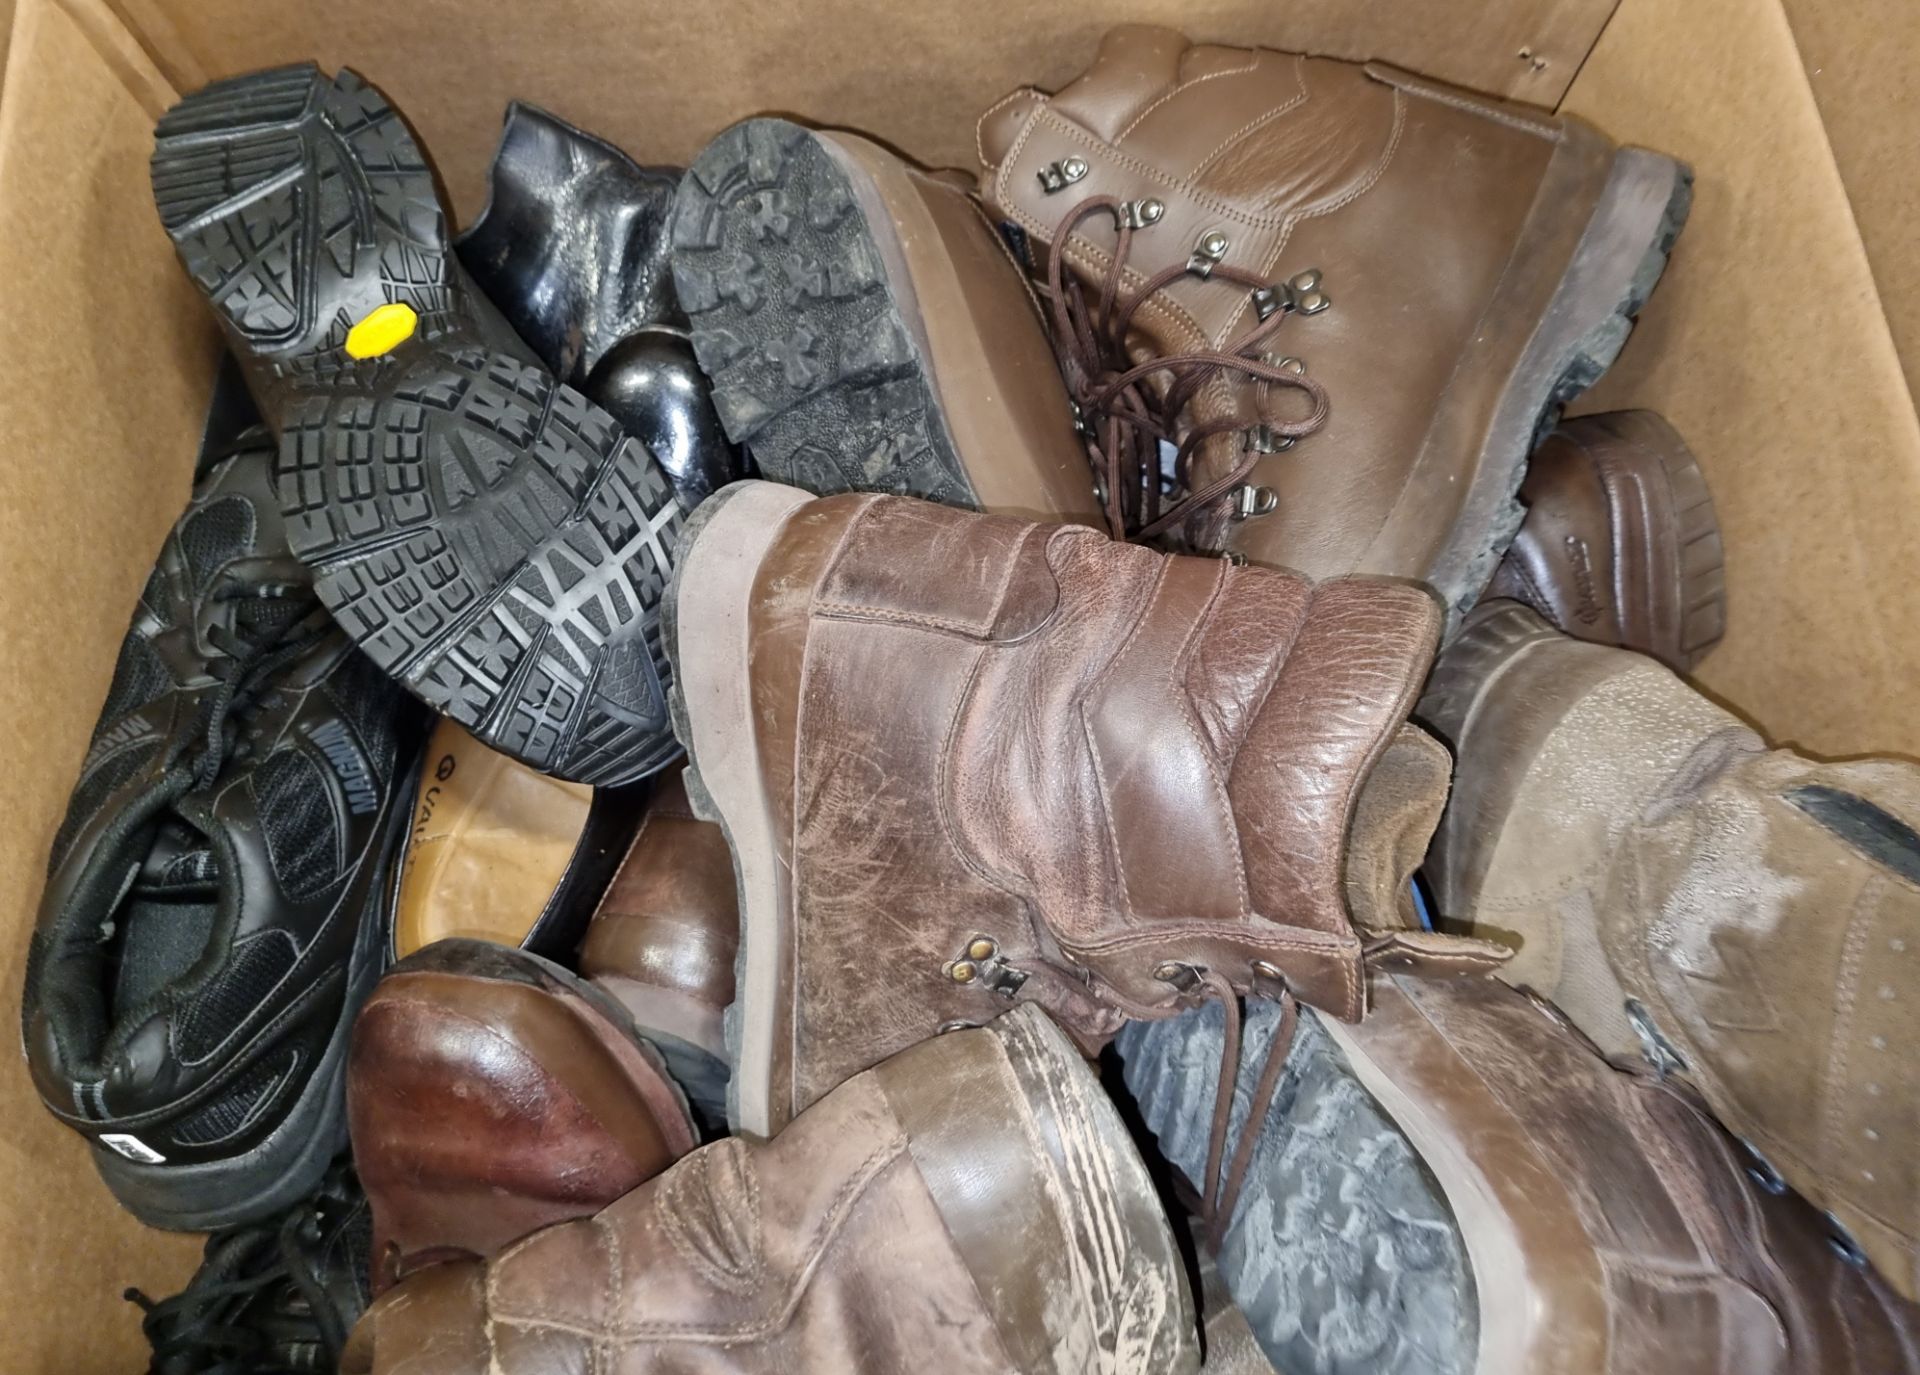 30x pairs of Various boots - Magnum Haix YDS - mixed grades and sizes - Image 2 of 4